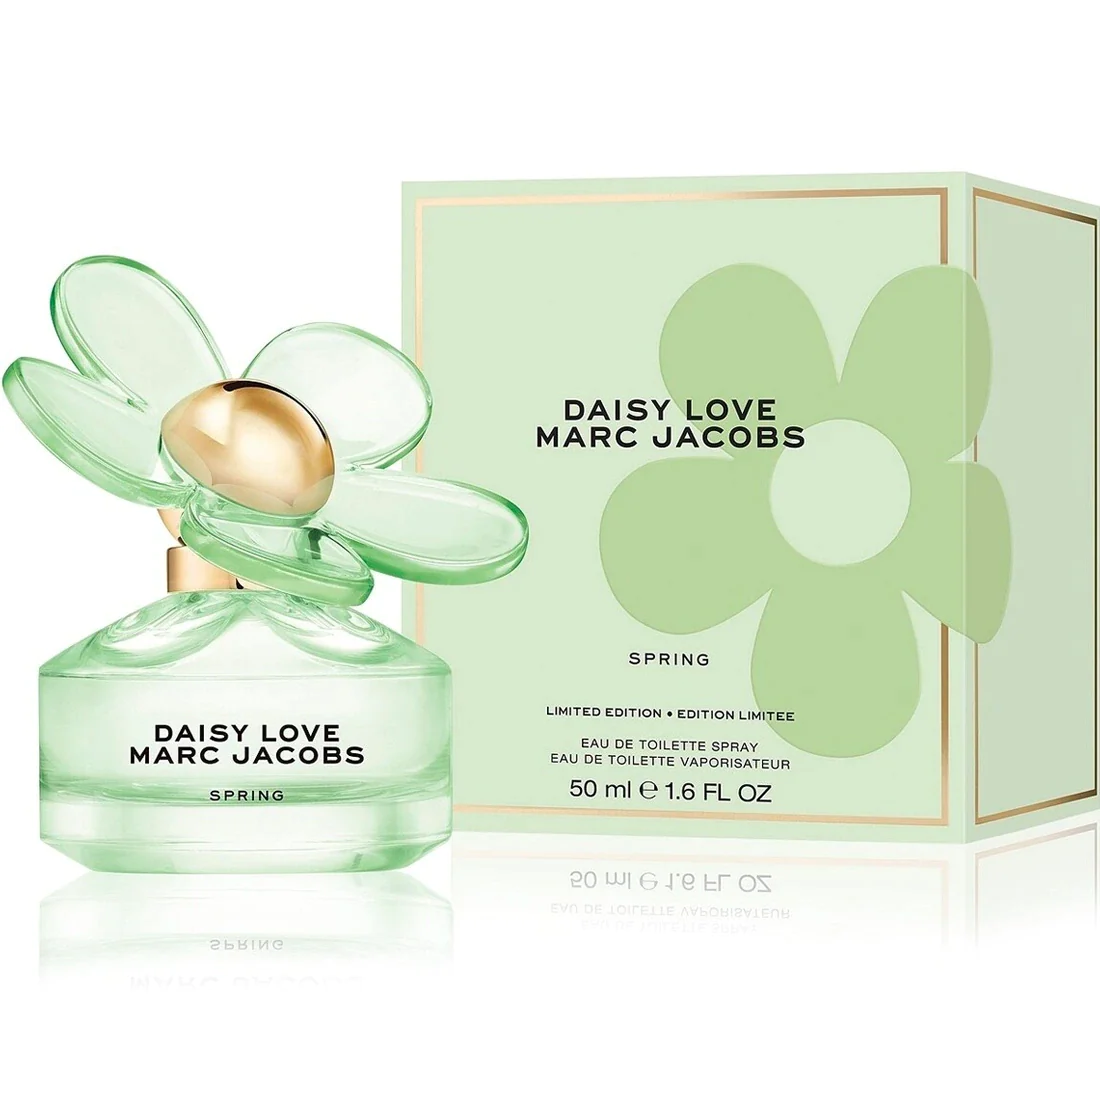 MARC JACOBS DAISY LOVE EDT 1.6OZ SPRING with Shop Hustle - WOMEN